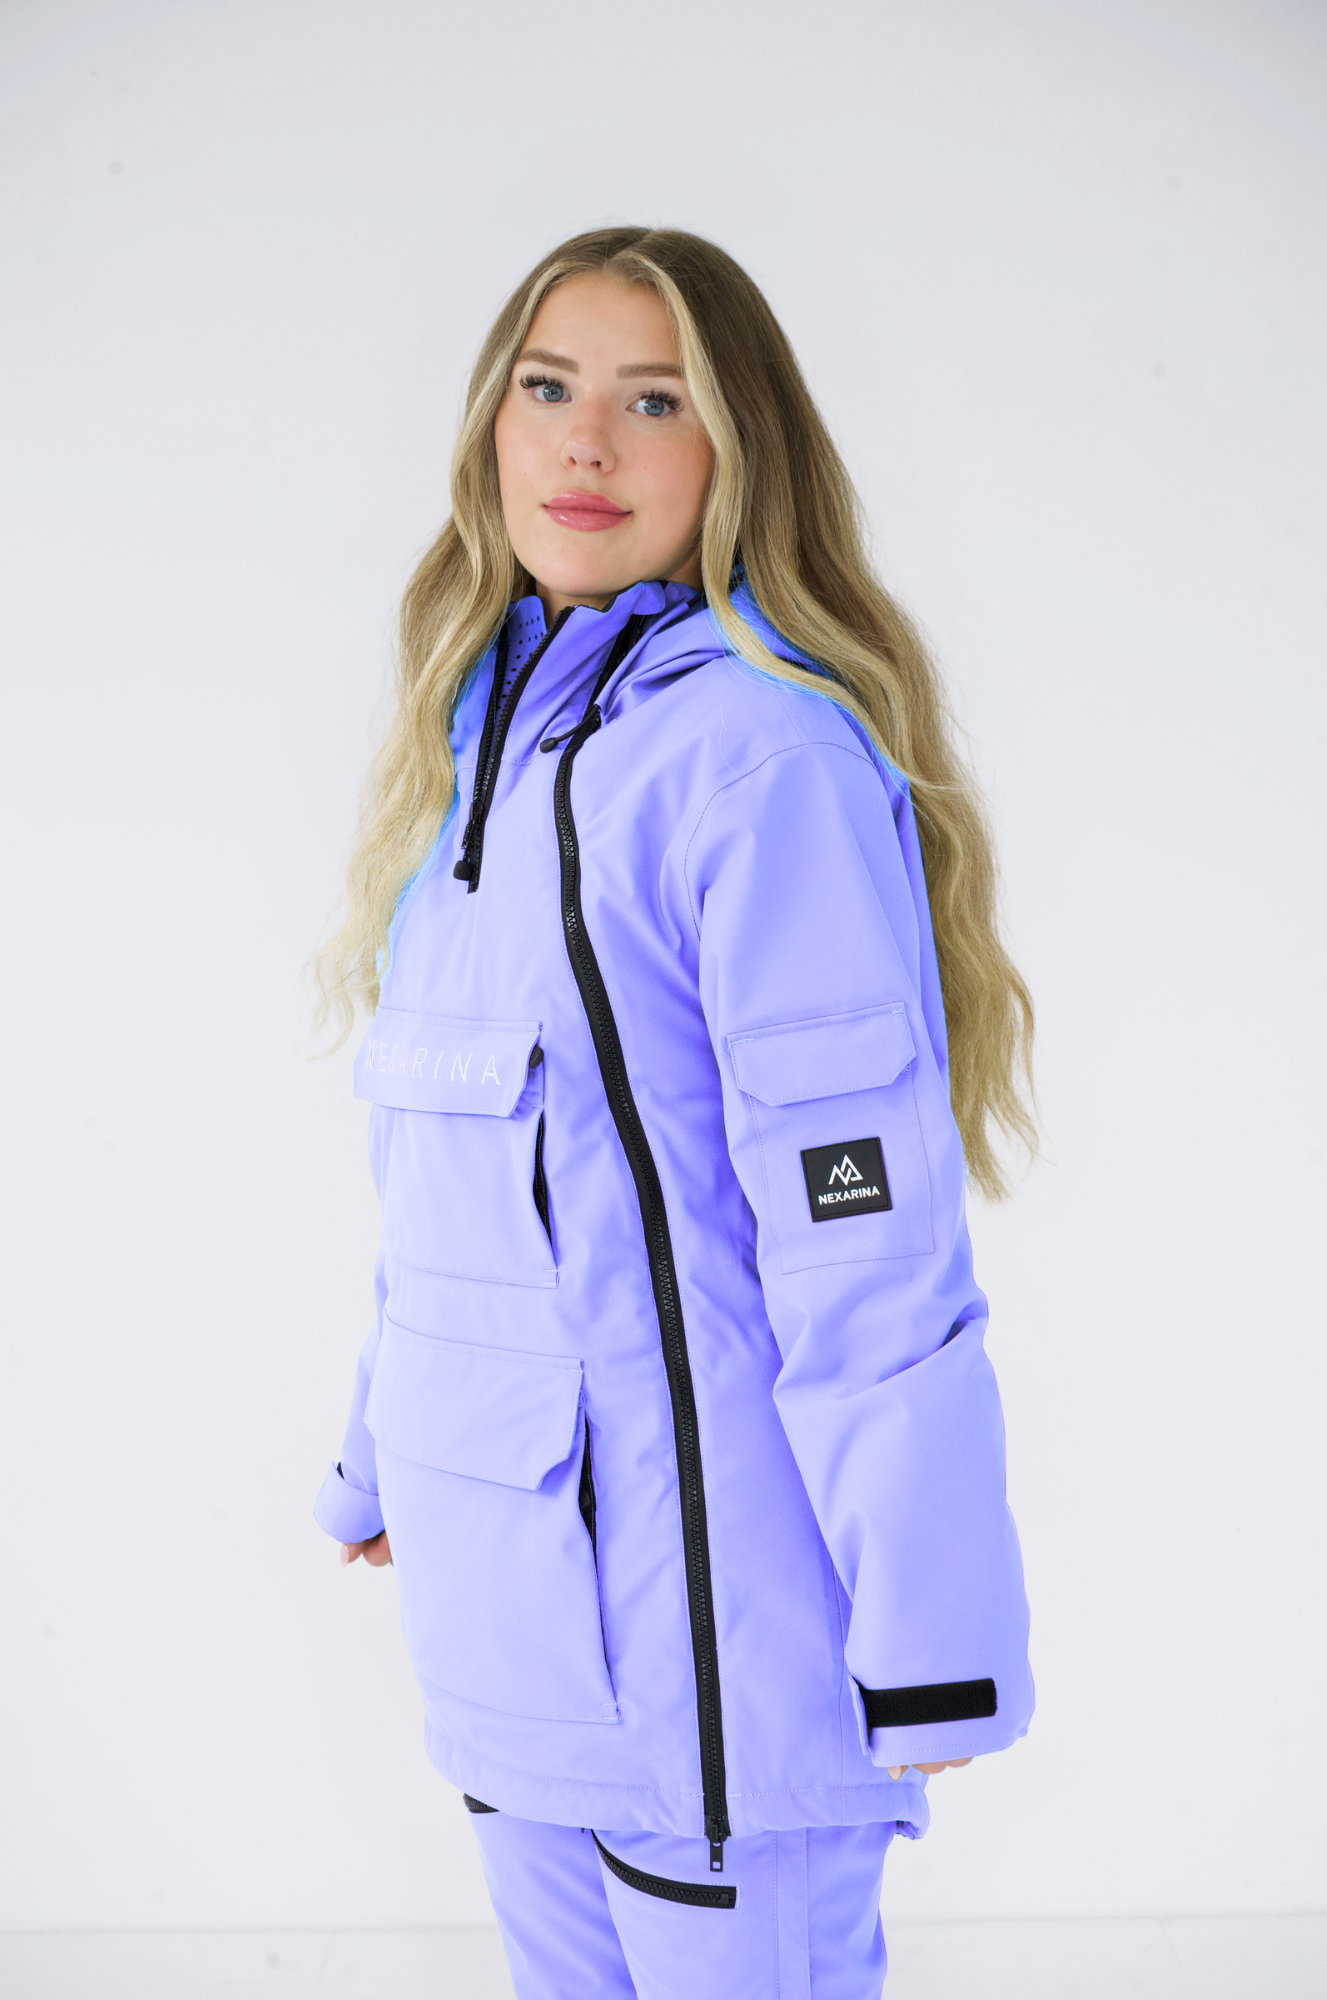  side view of a female model wearing Nexarina purple snowboarding gear, showcasing the sleek design and side features of the jacket and pants.